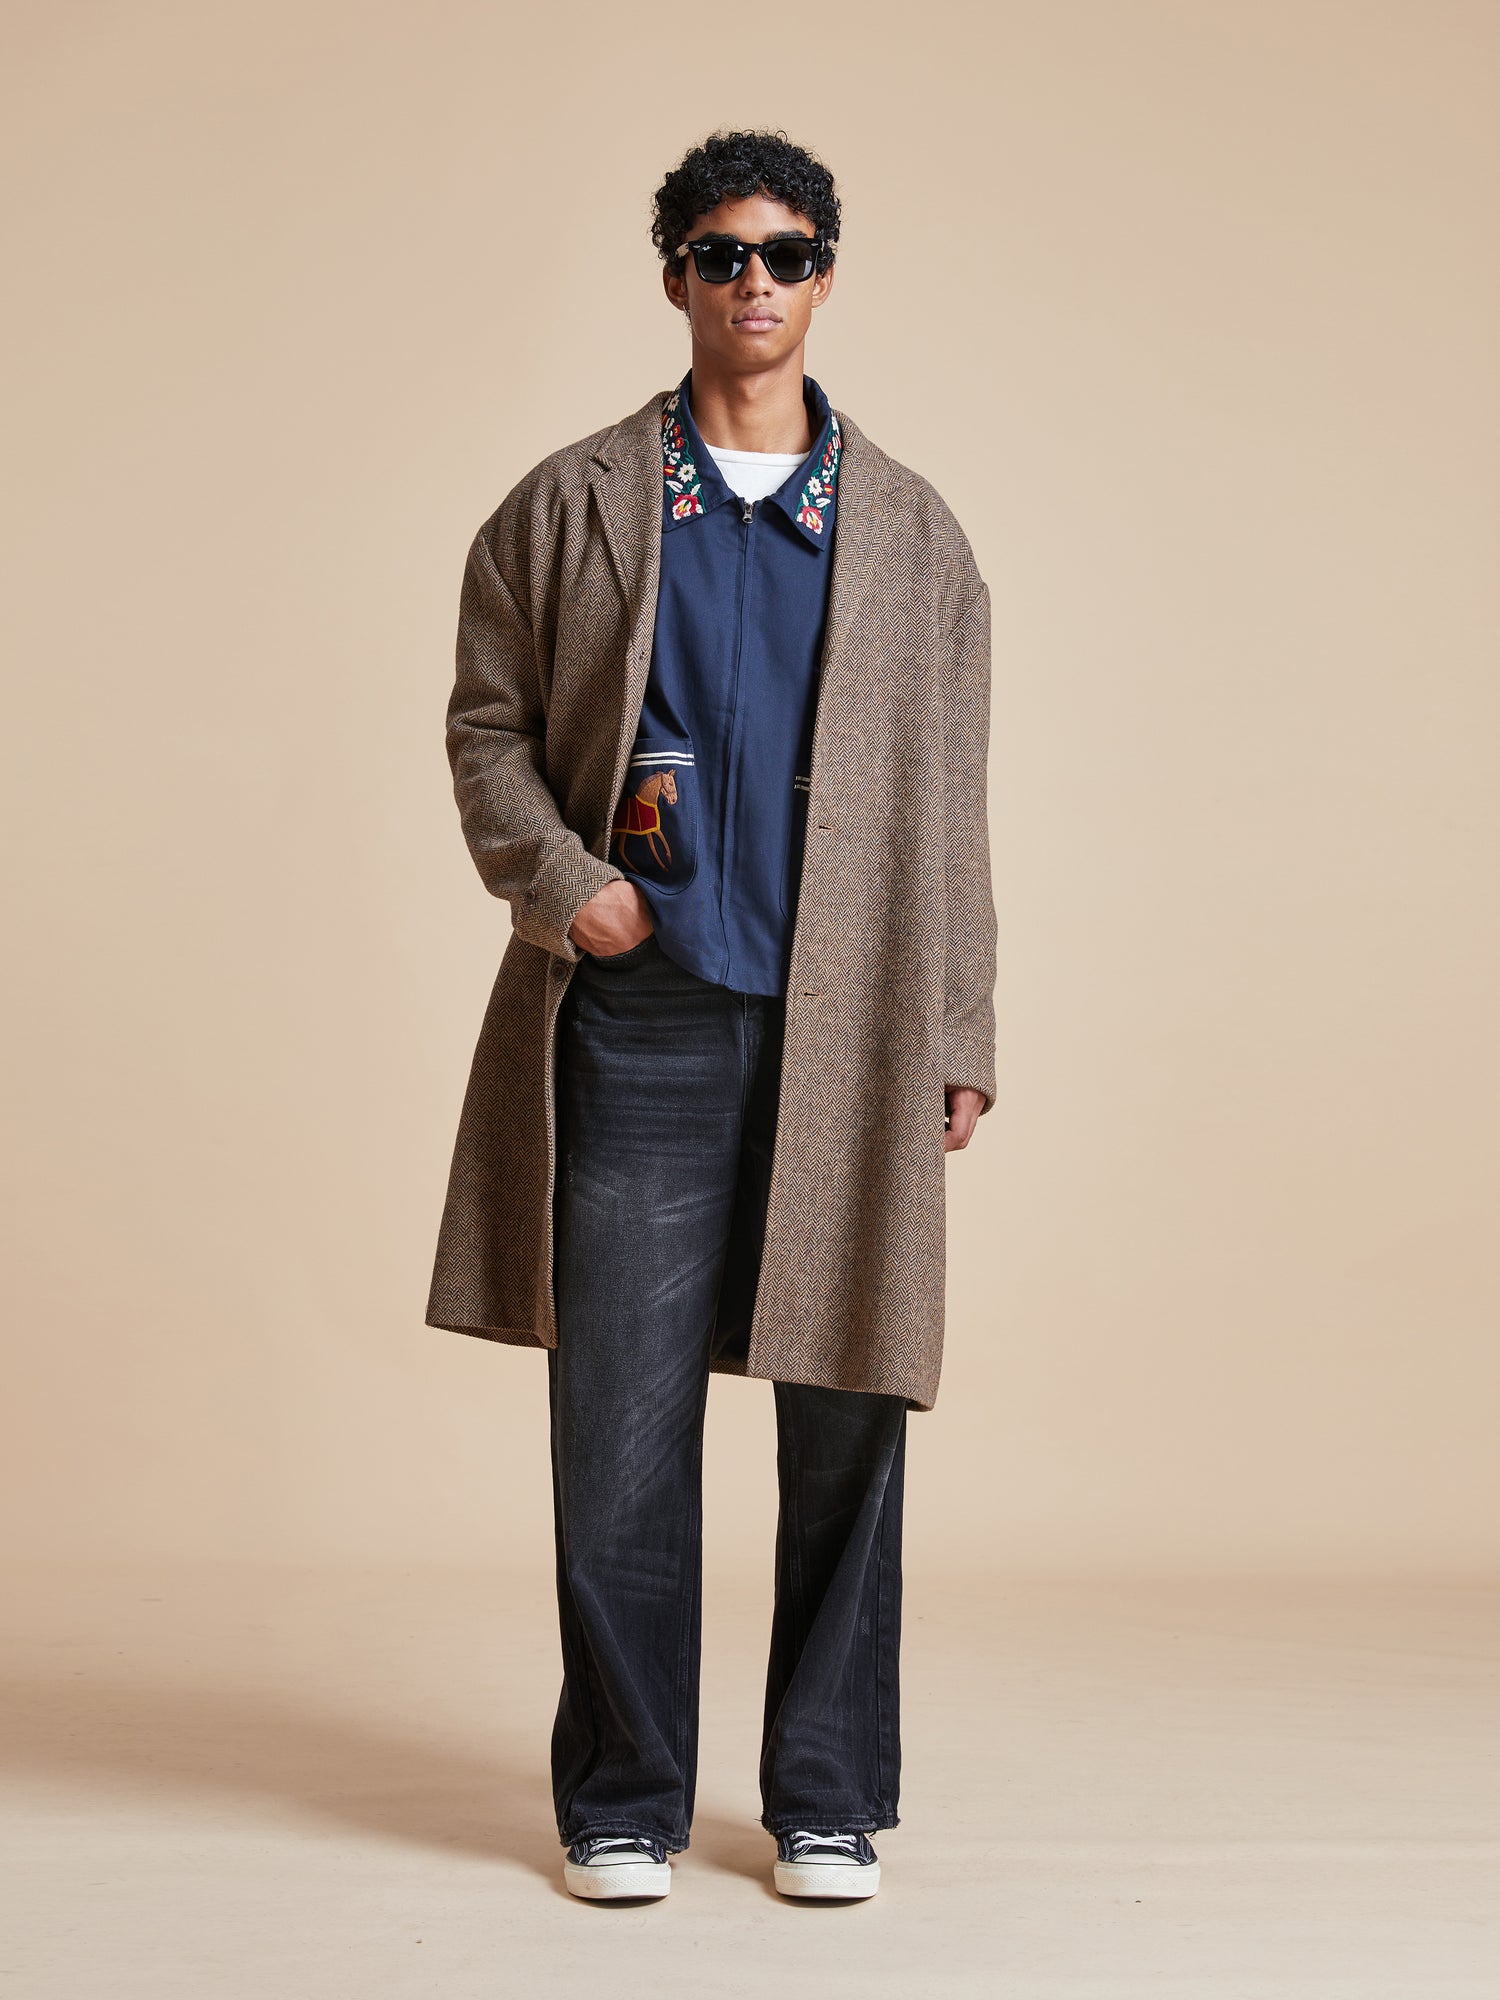 A man in a Found Elm Tweed Long Top Coat and jeans standing on a beige background.